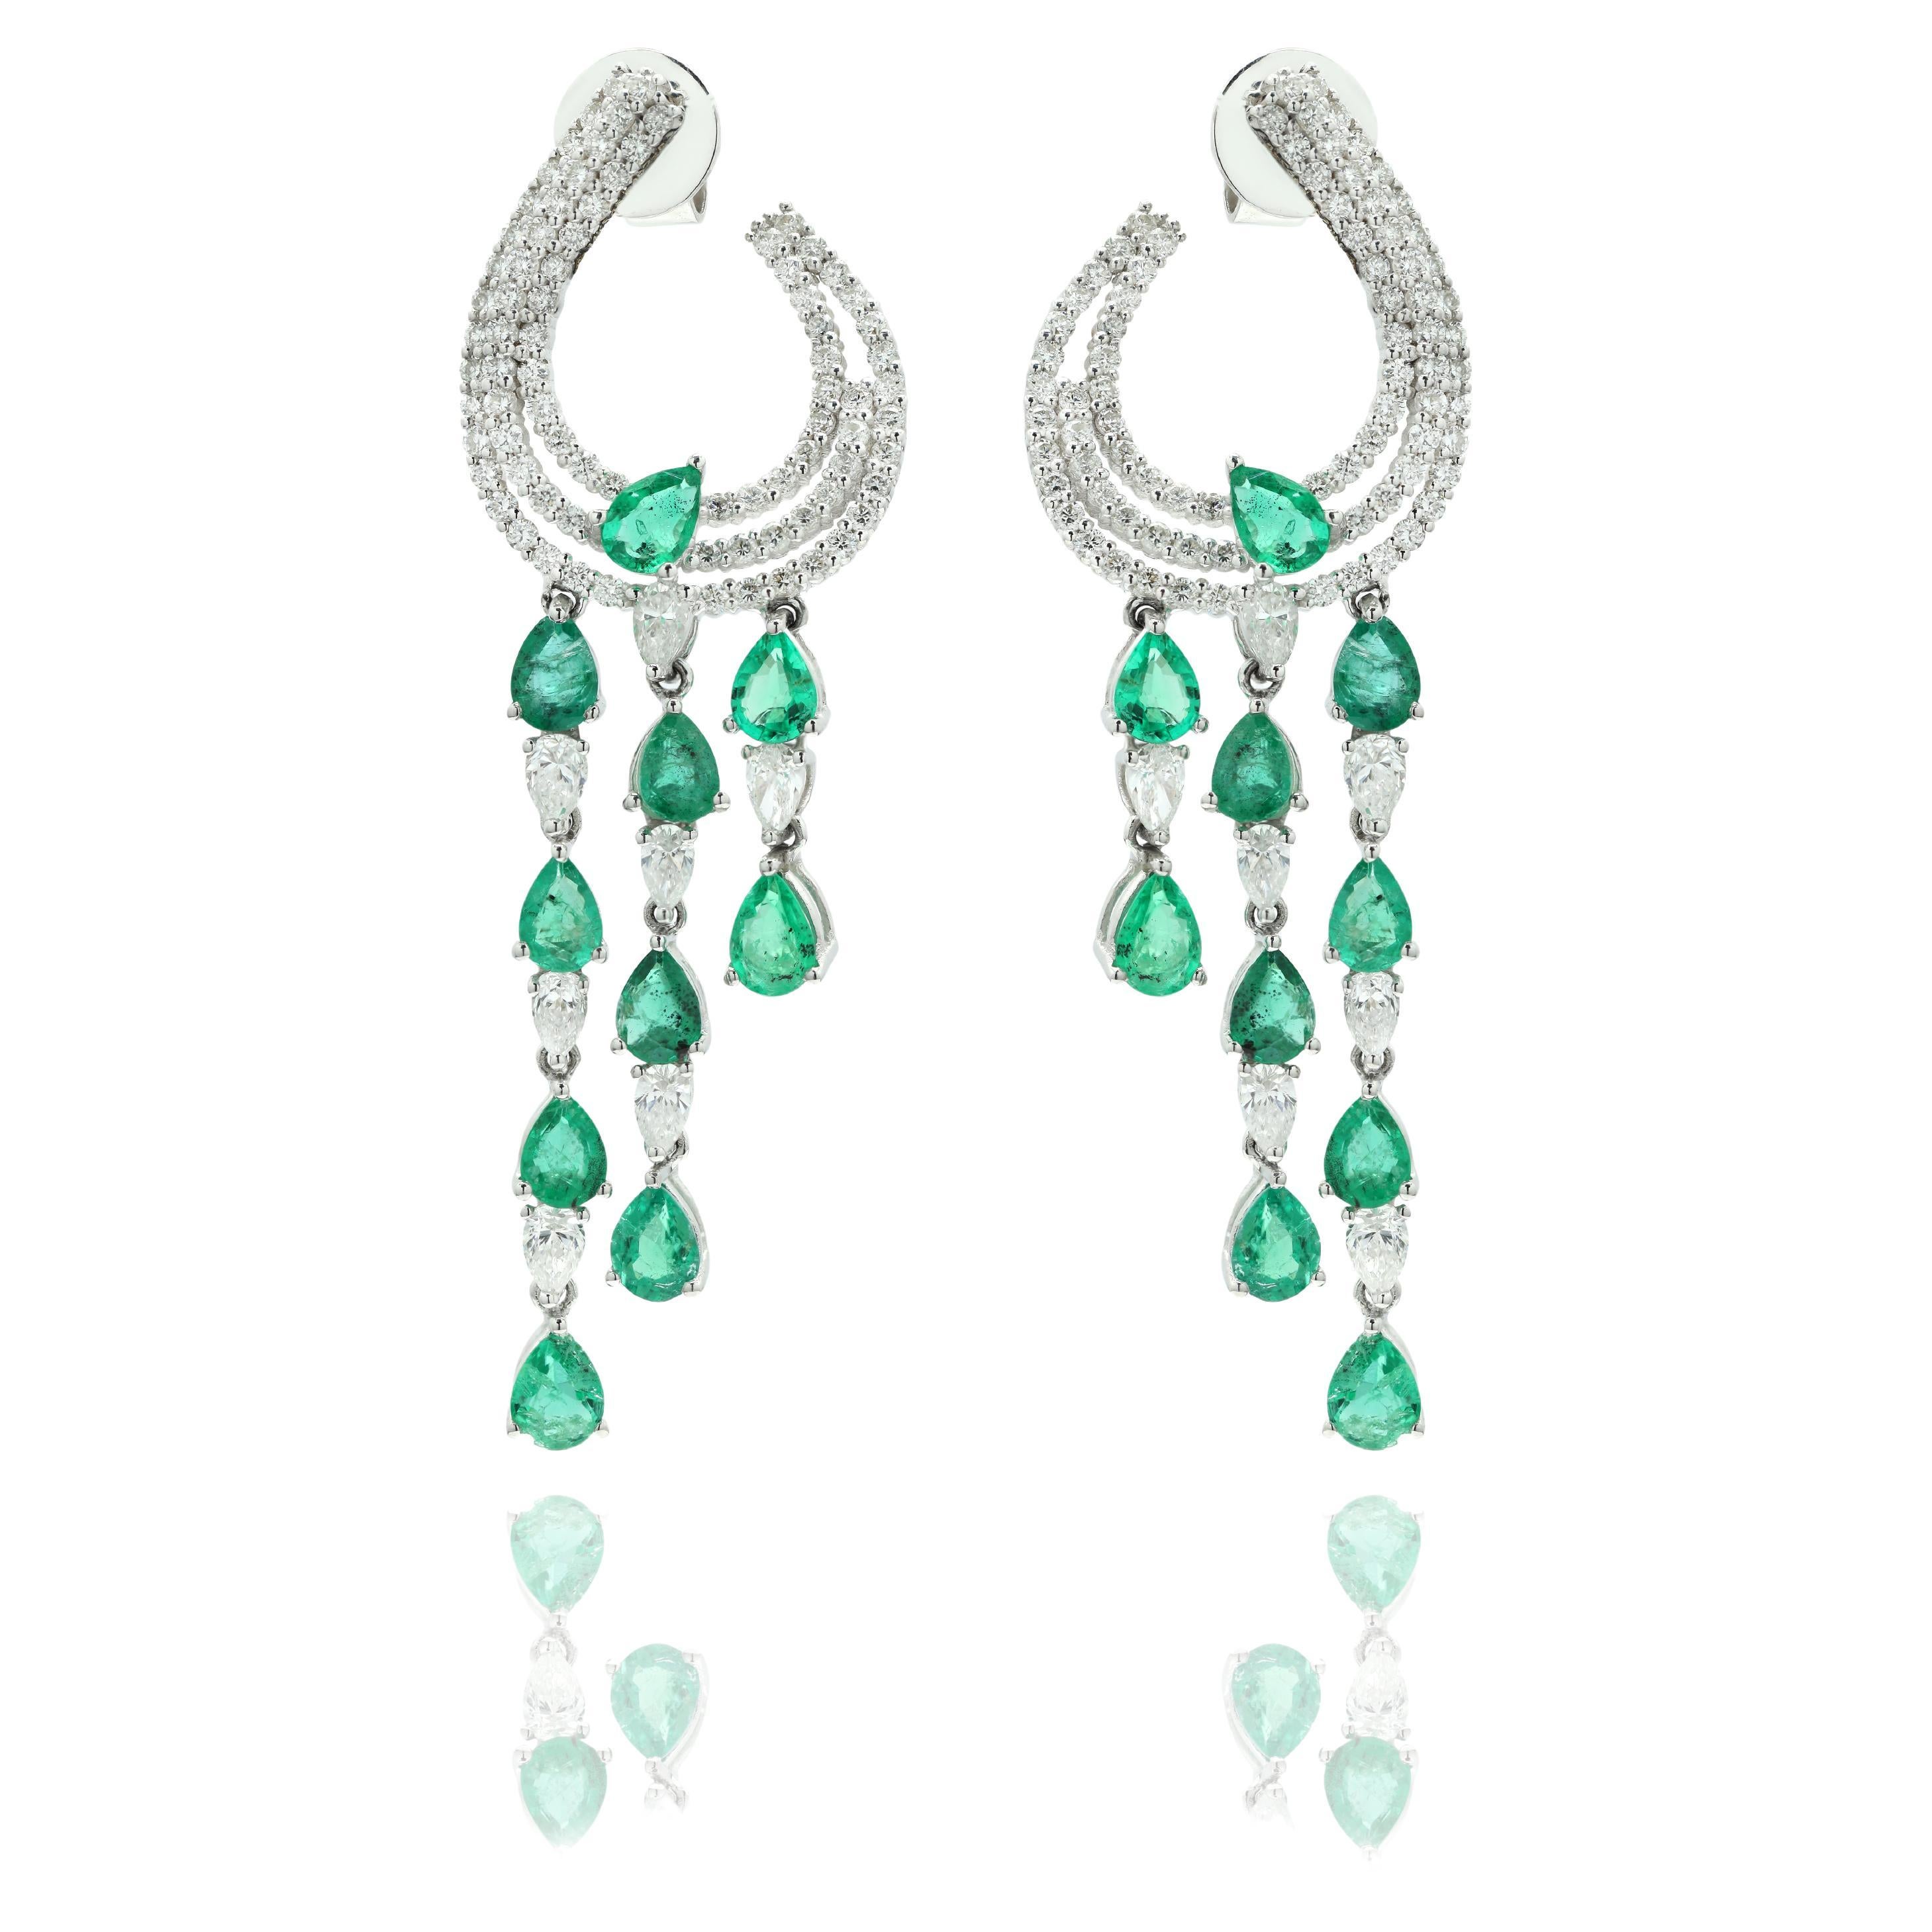 Modern Emerald Cocktail Earrings Studded with Diamonds Set 14K White Gold